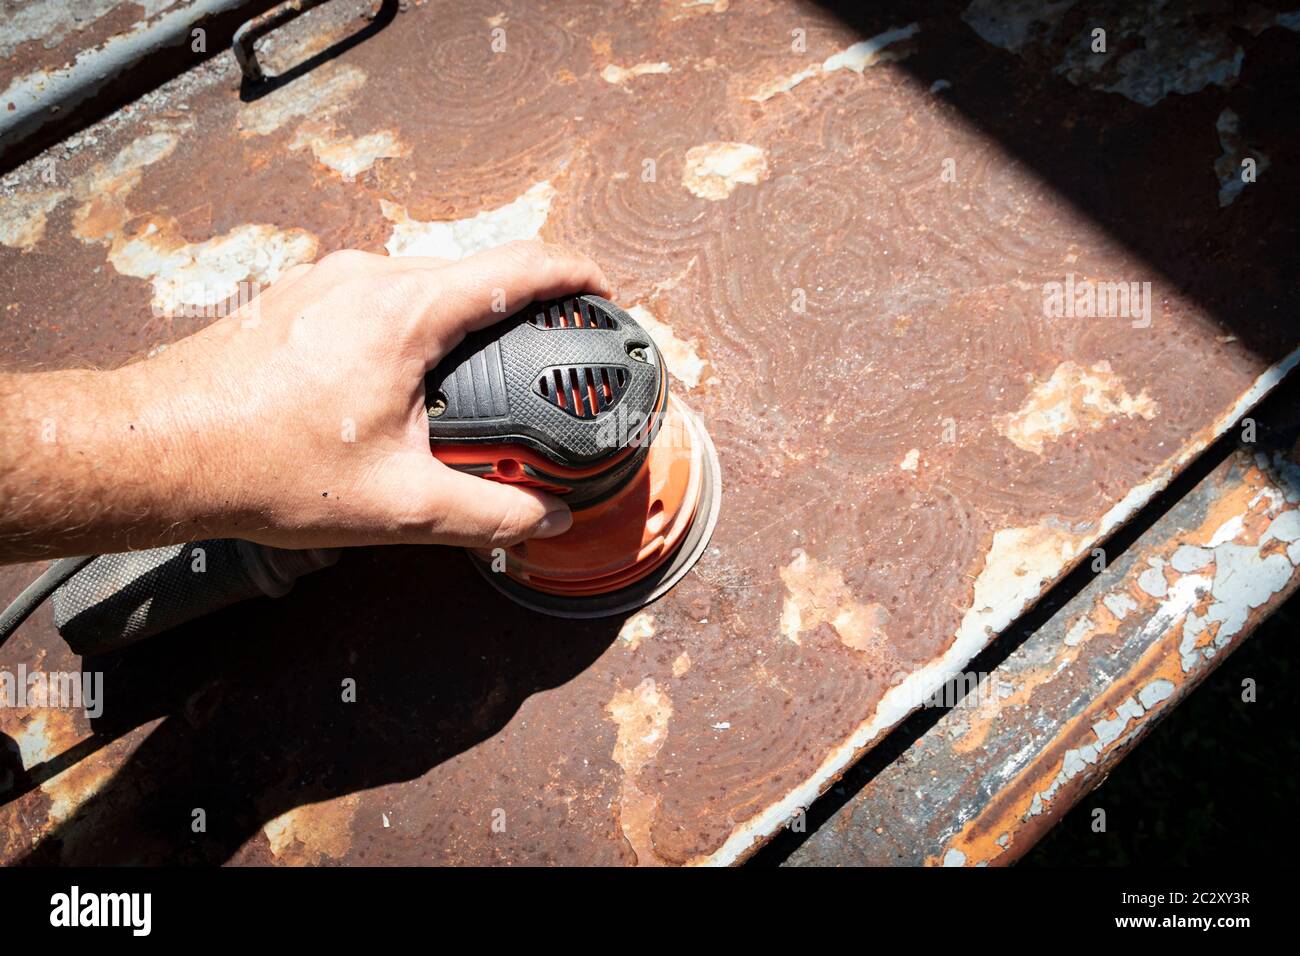 Man's hand operates a disc/orbital sander, to remove paint and rust from metal doors Stock Photo